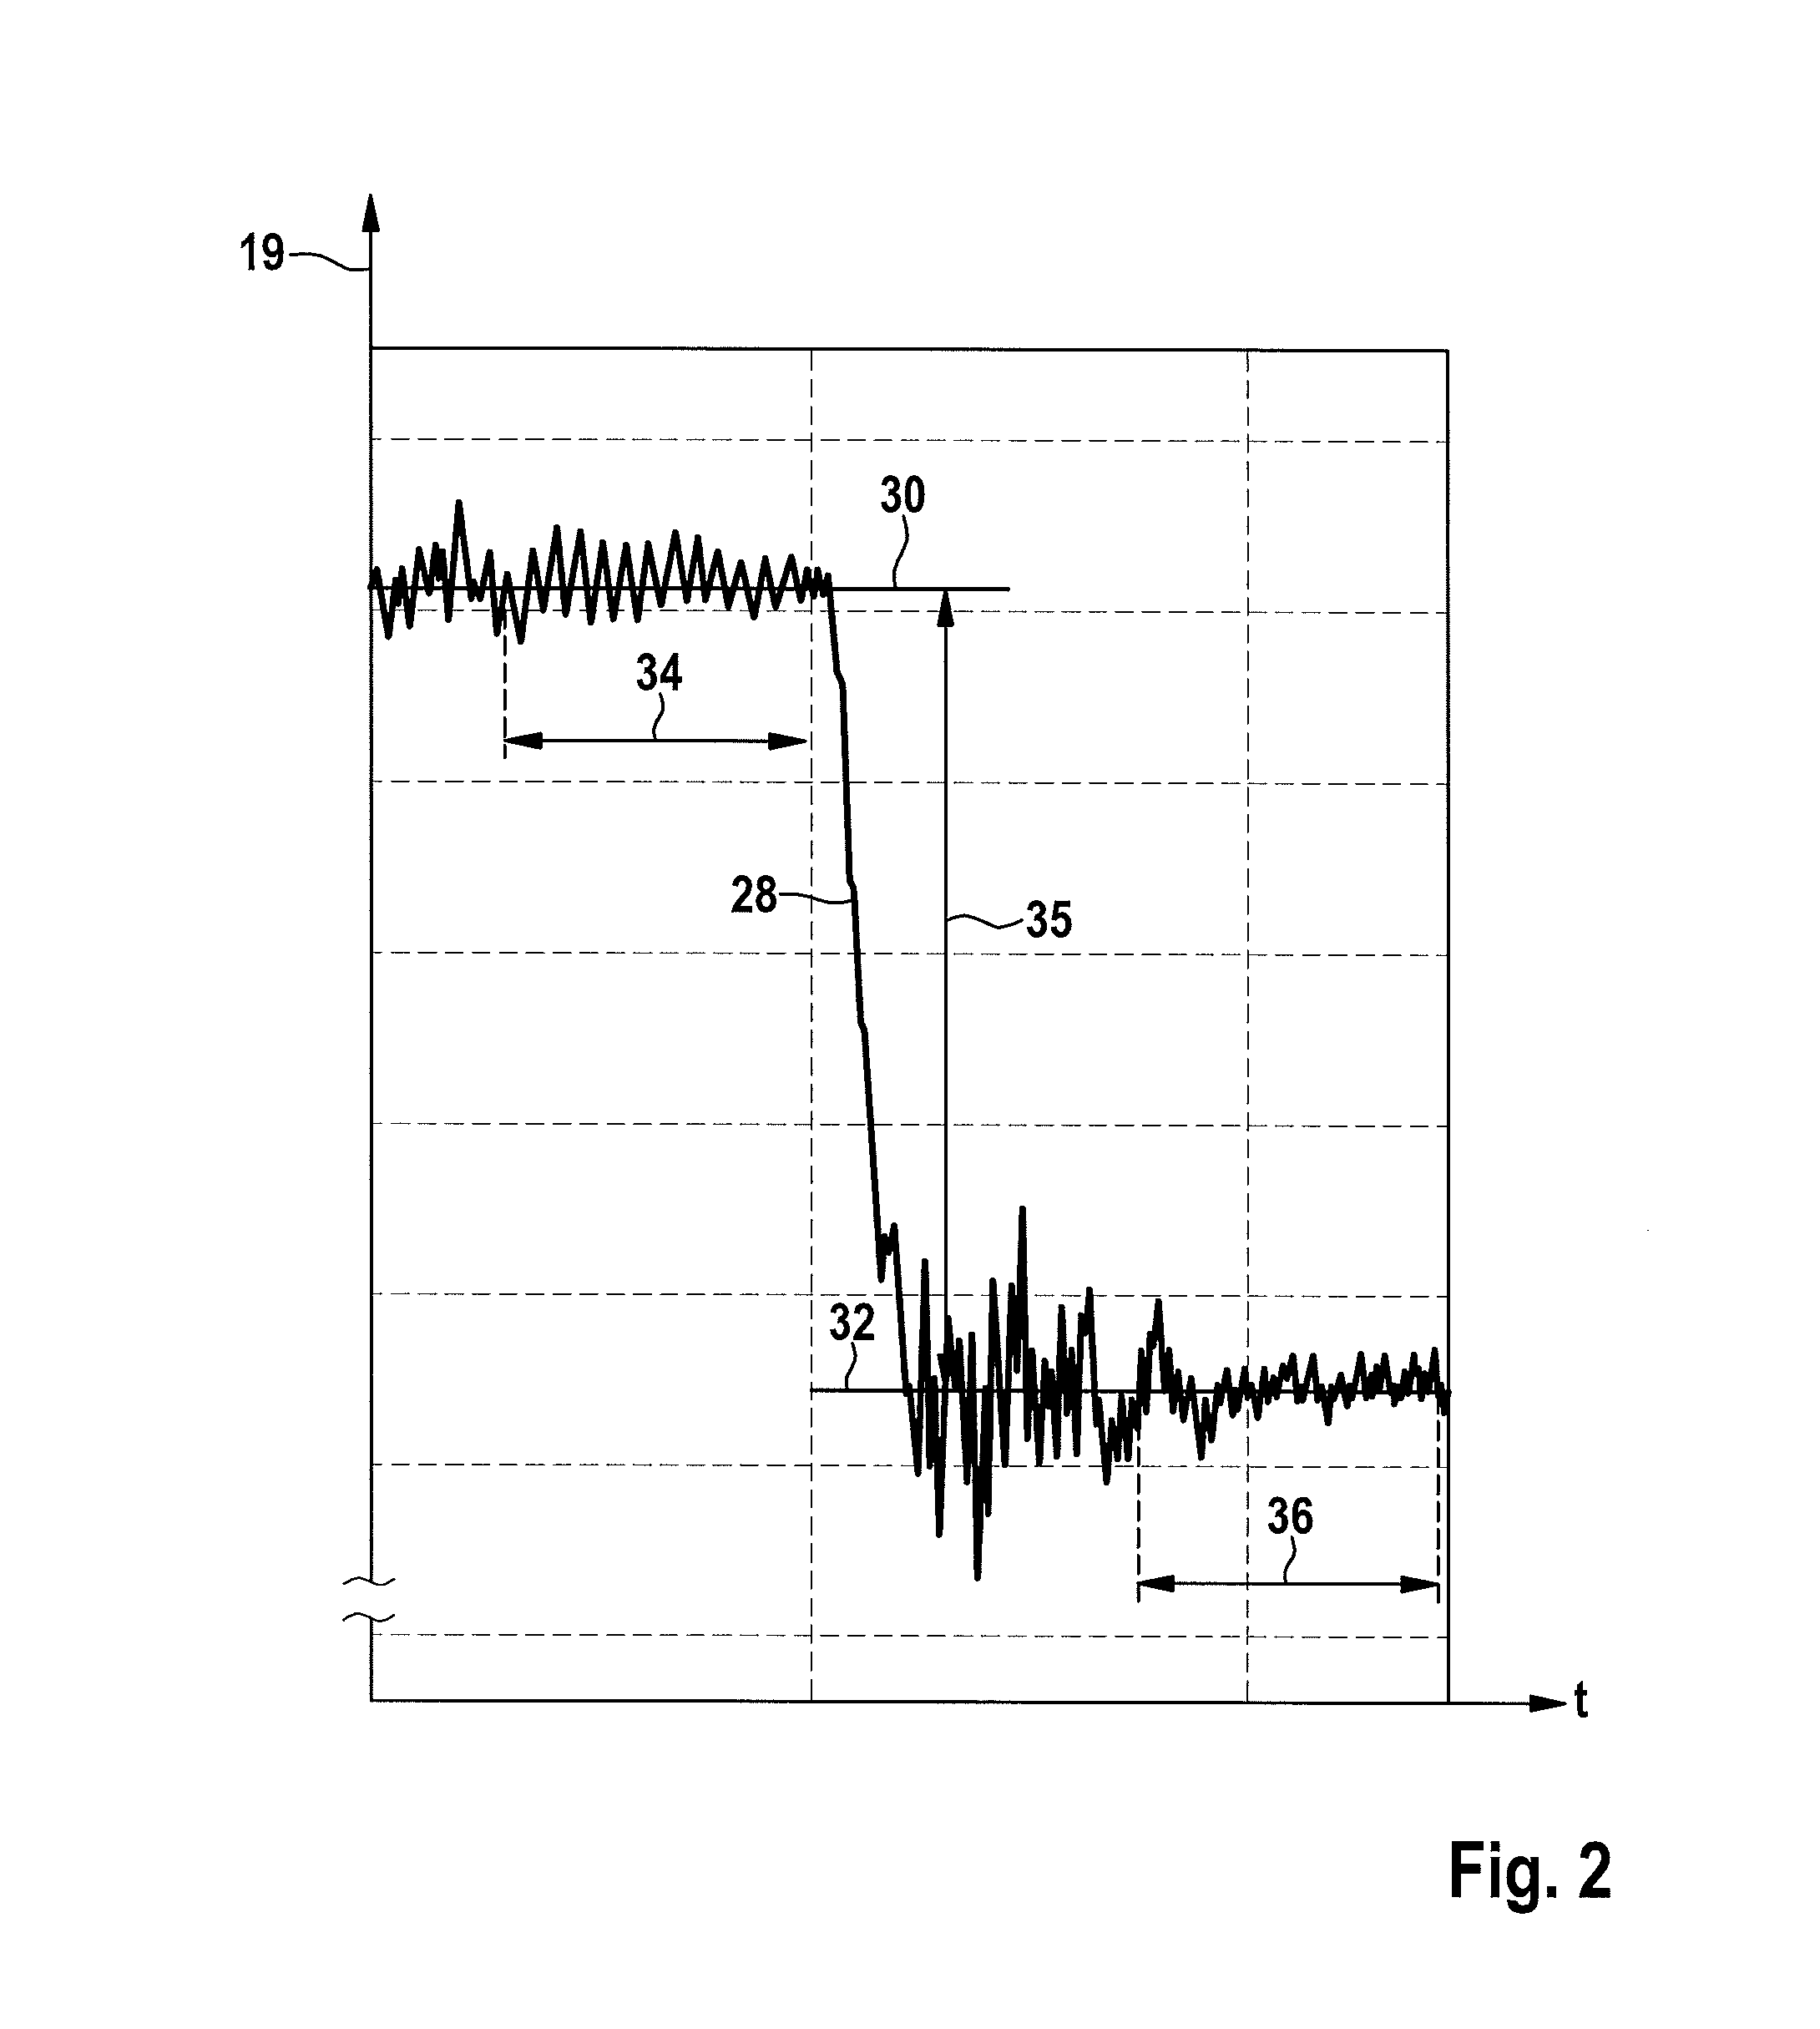 Method for operating a fuel injection system